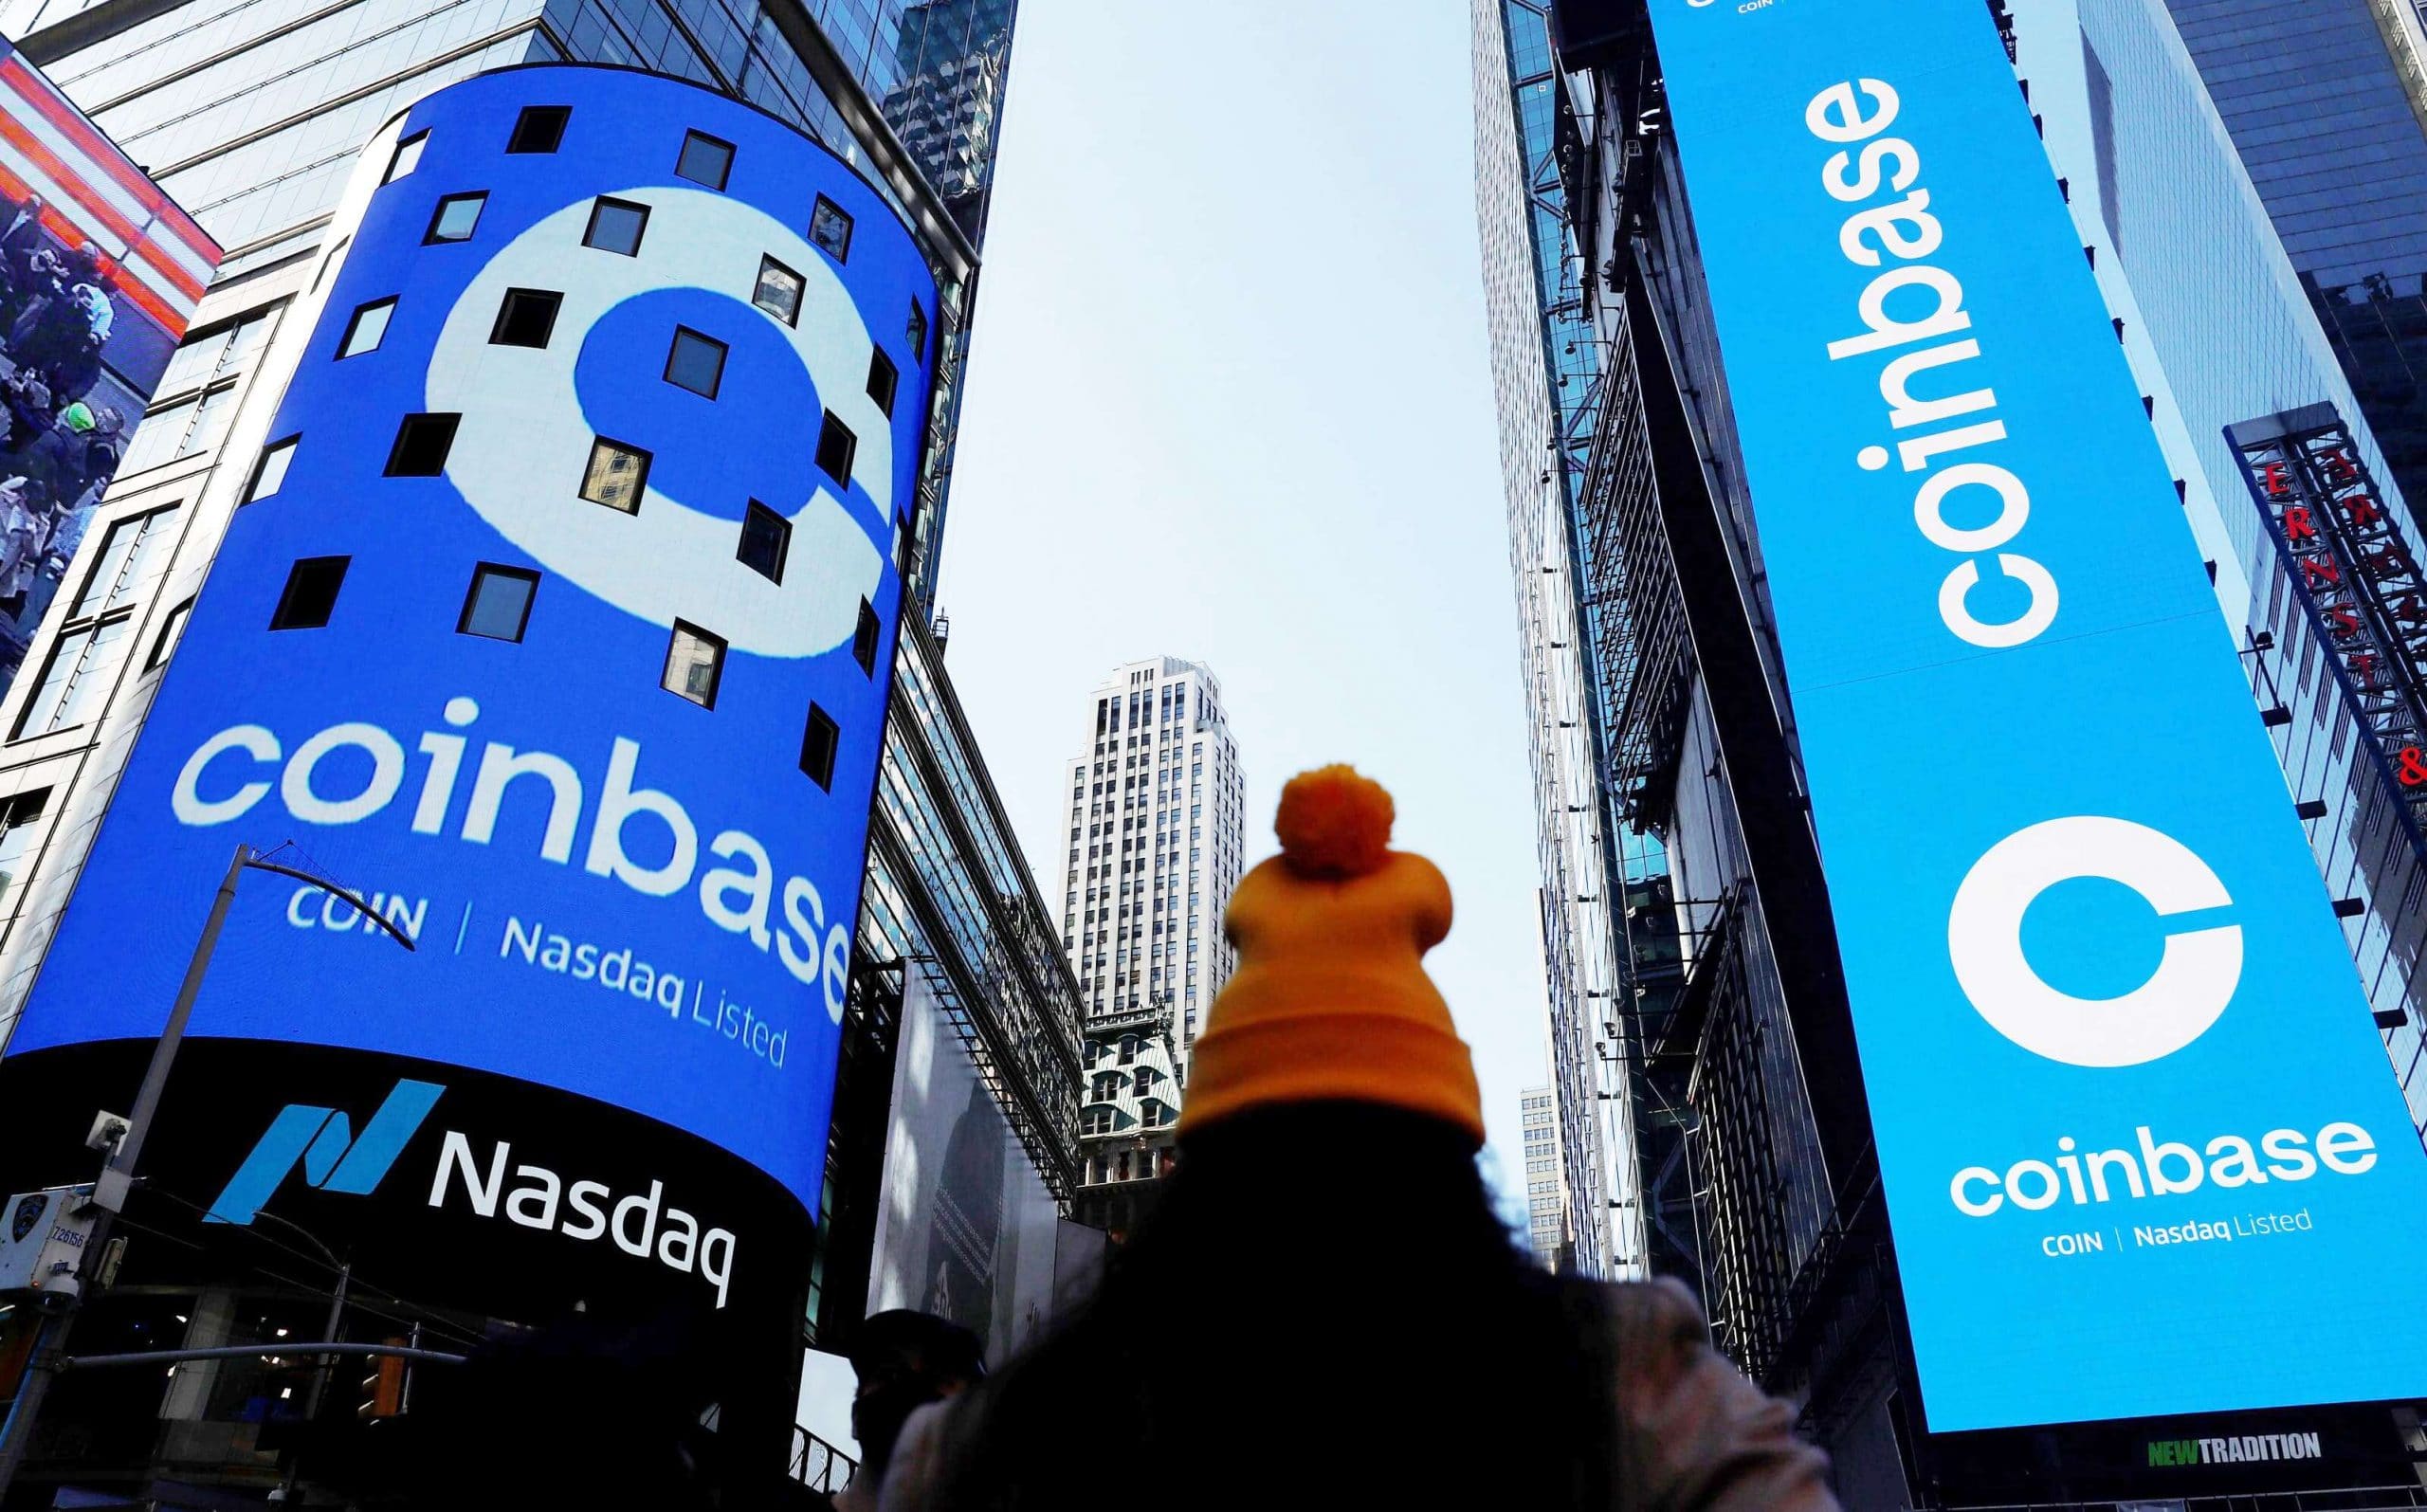 Coinbase Offers Jobs, Takes Them Back